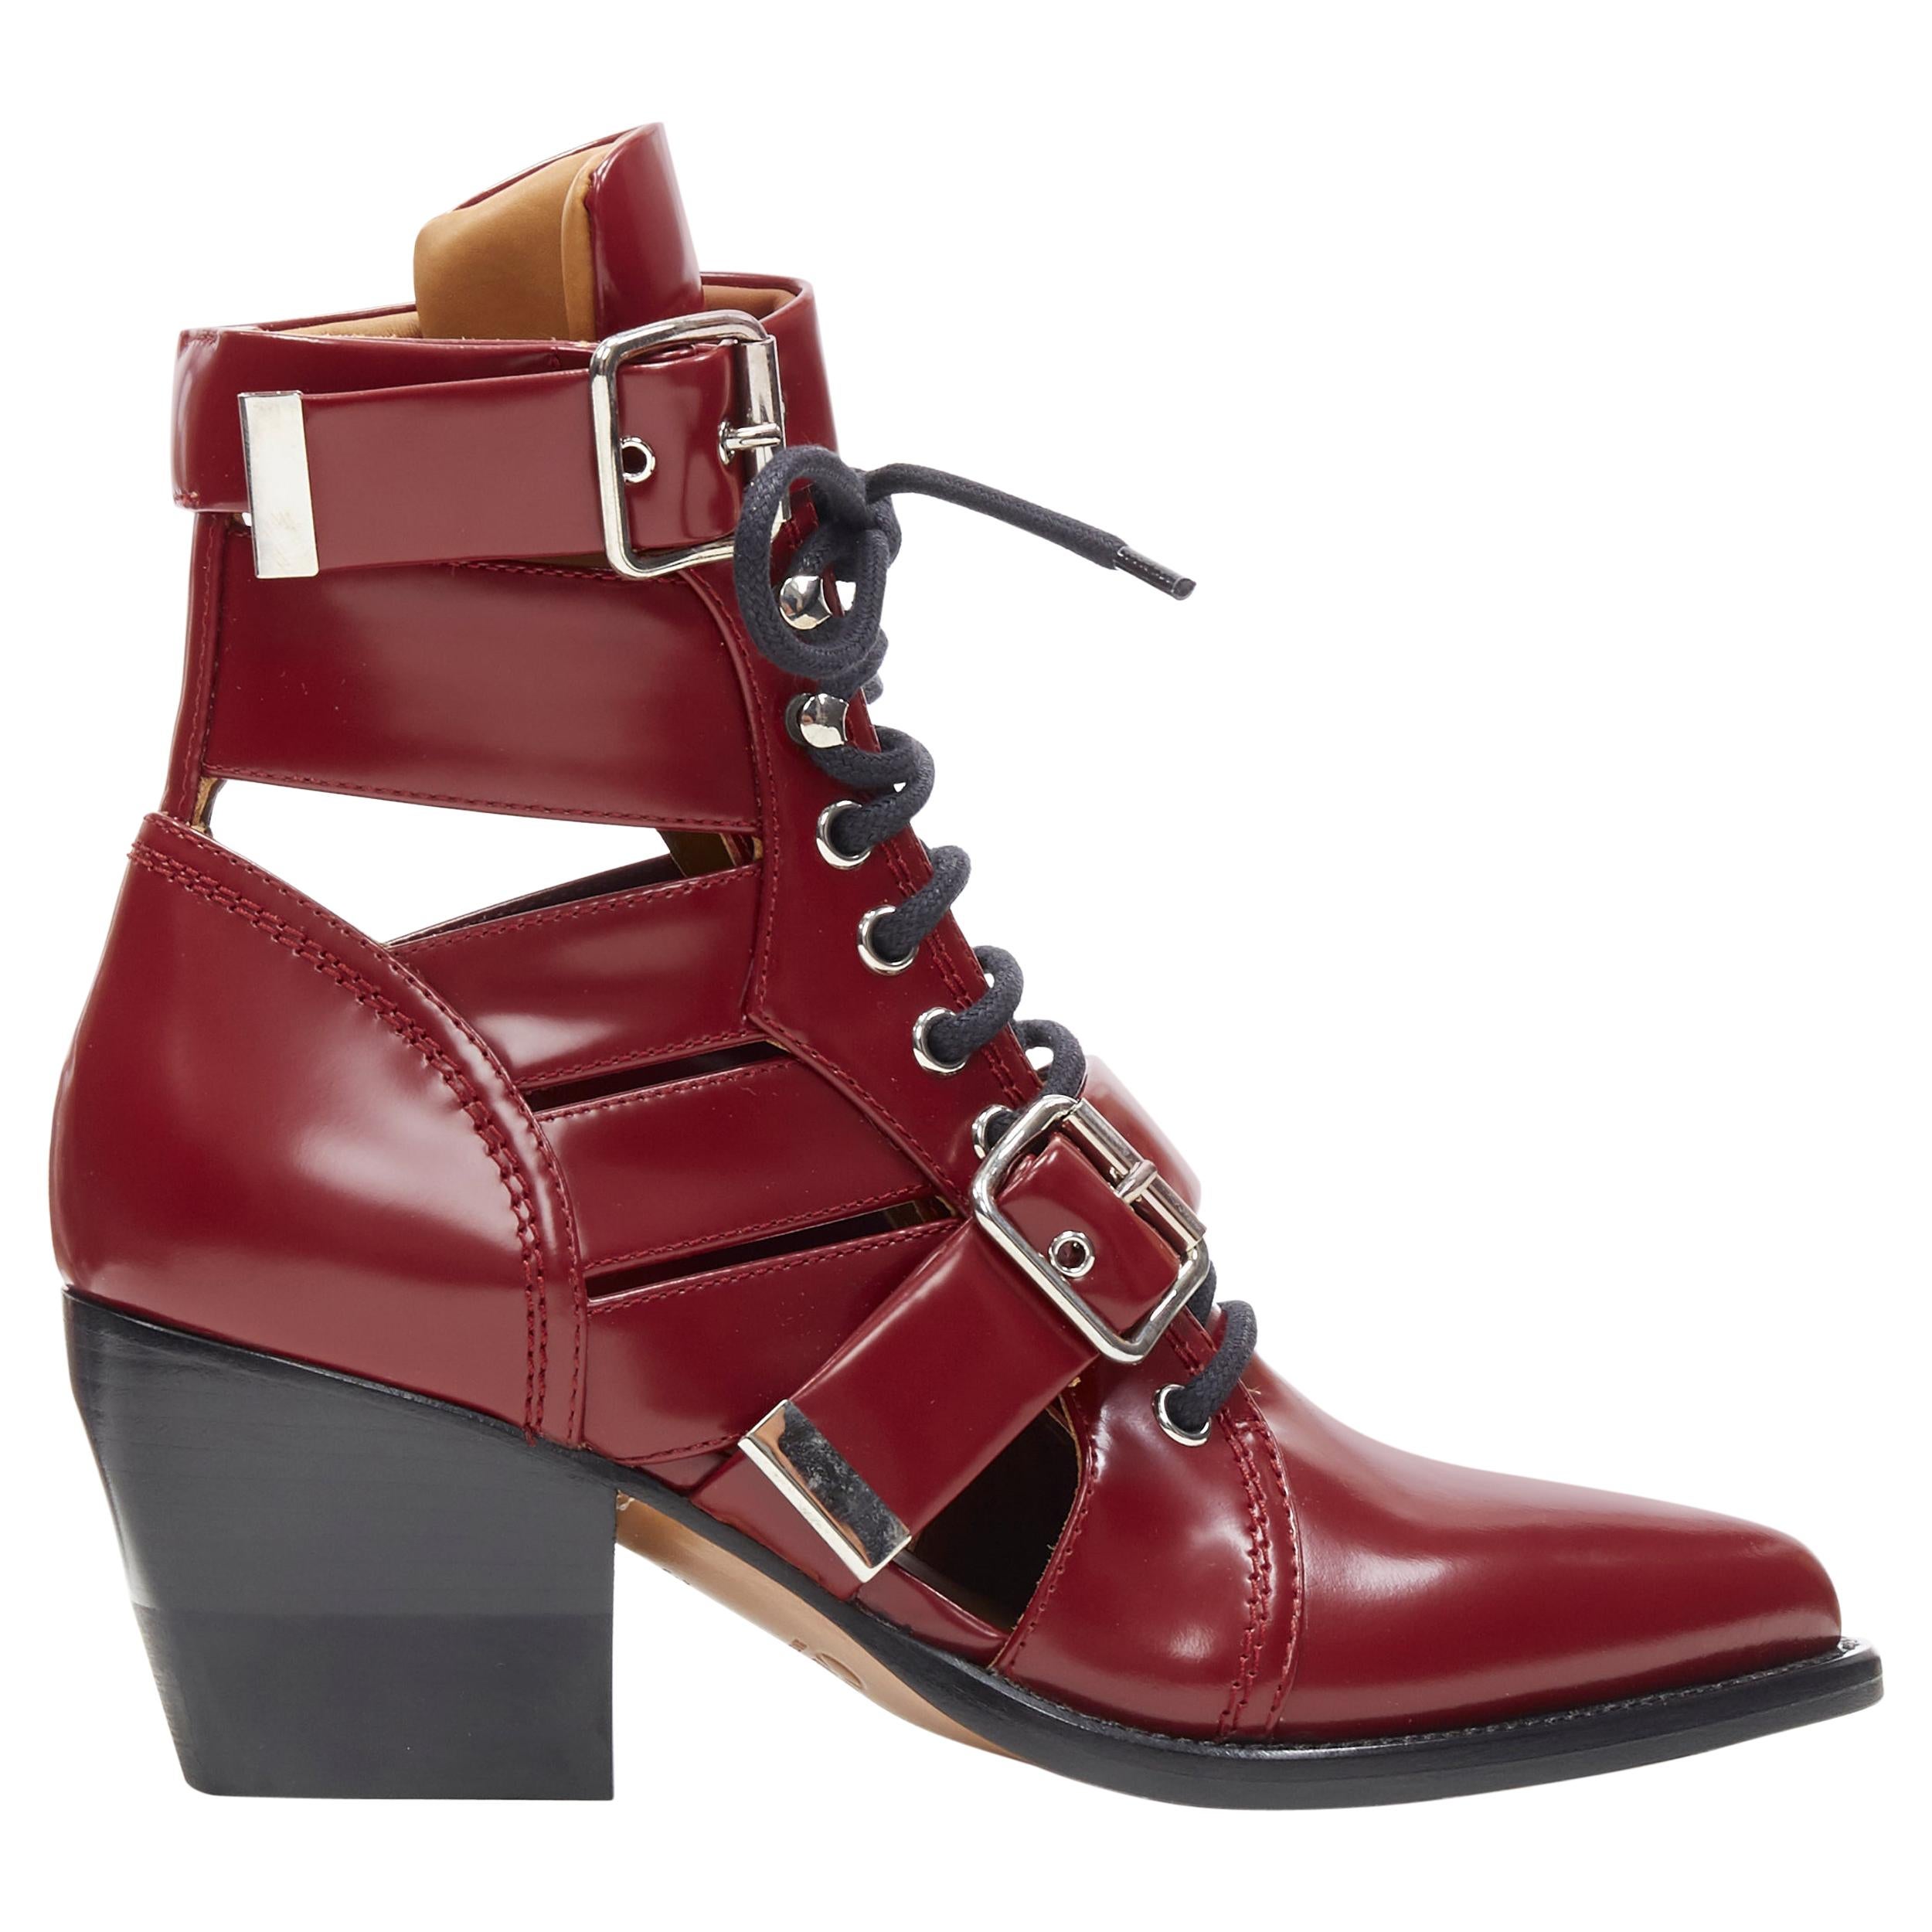 new CHLOE Rylee burgundy red leather cut out buckled pointy ankle boot EU37